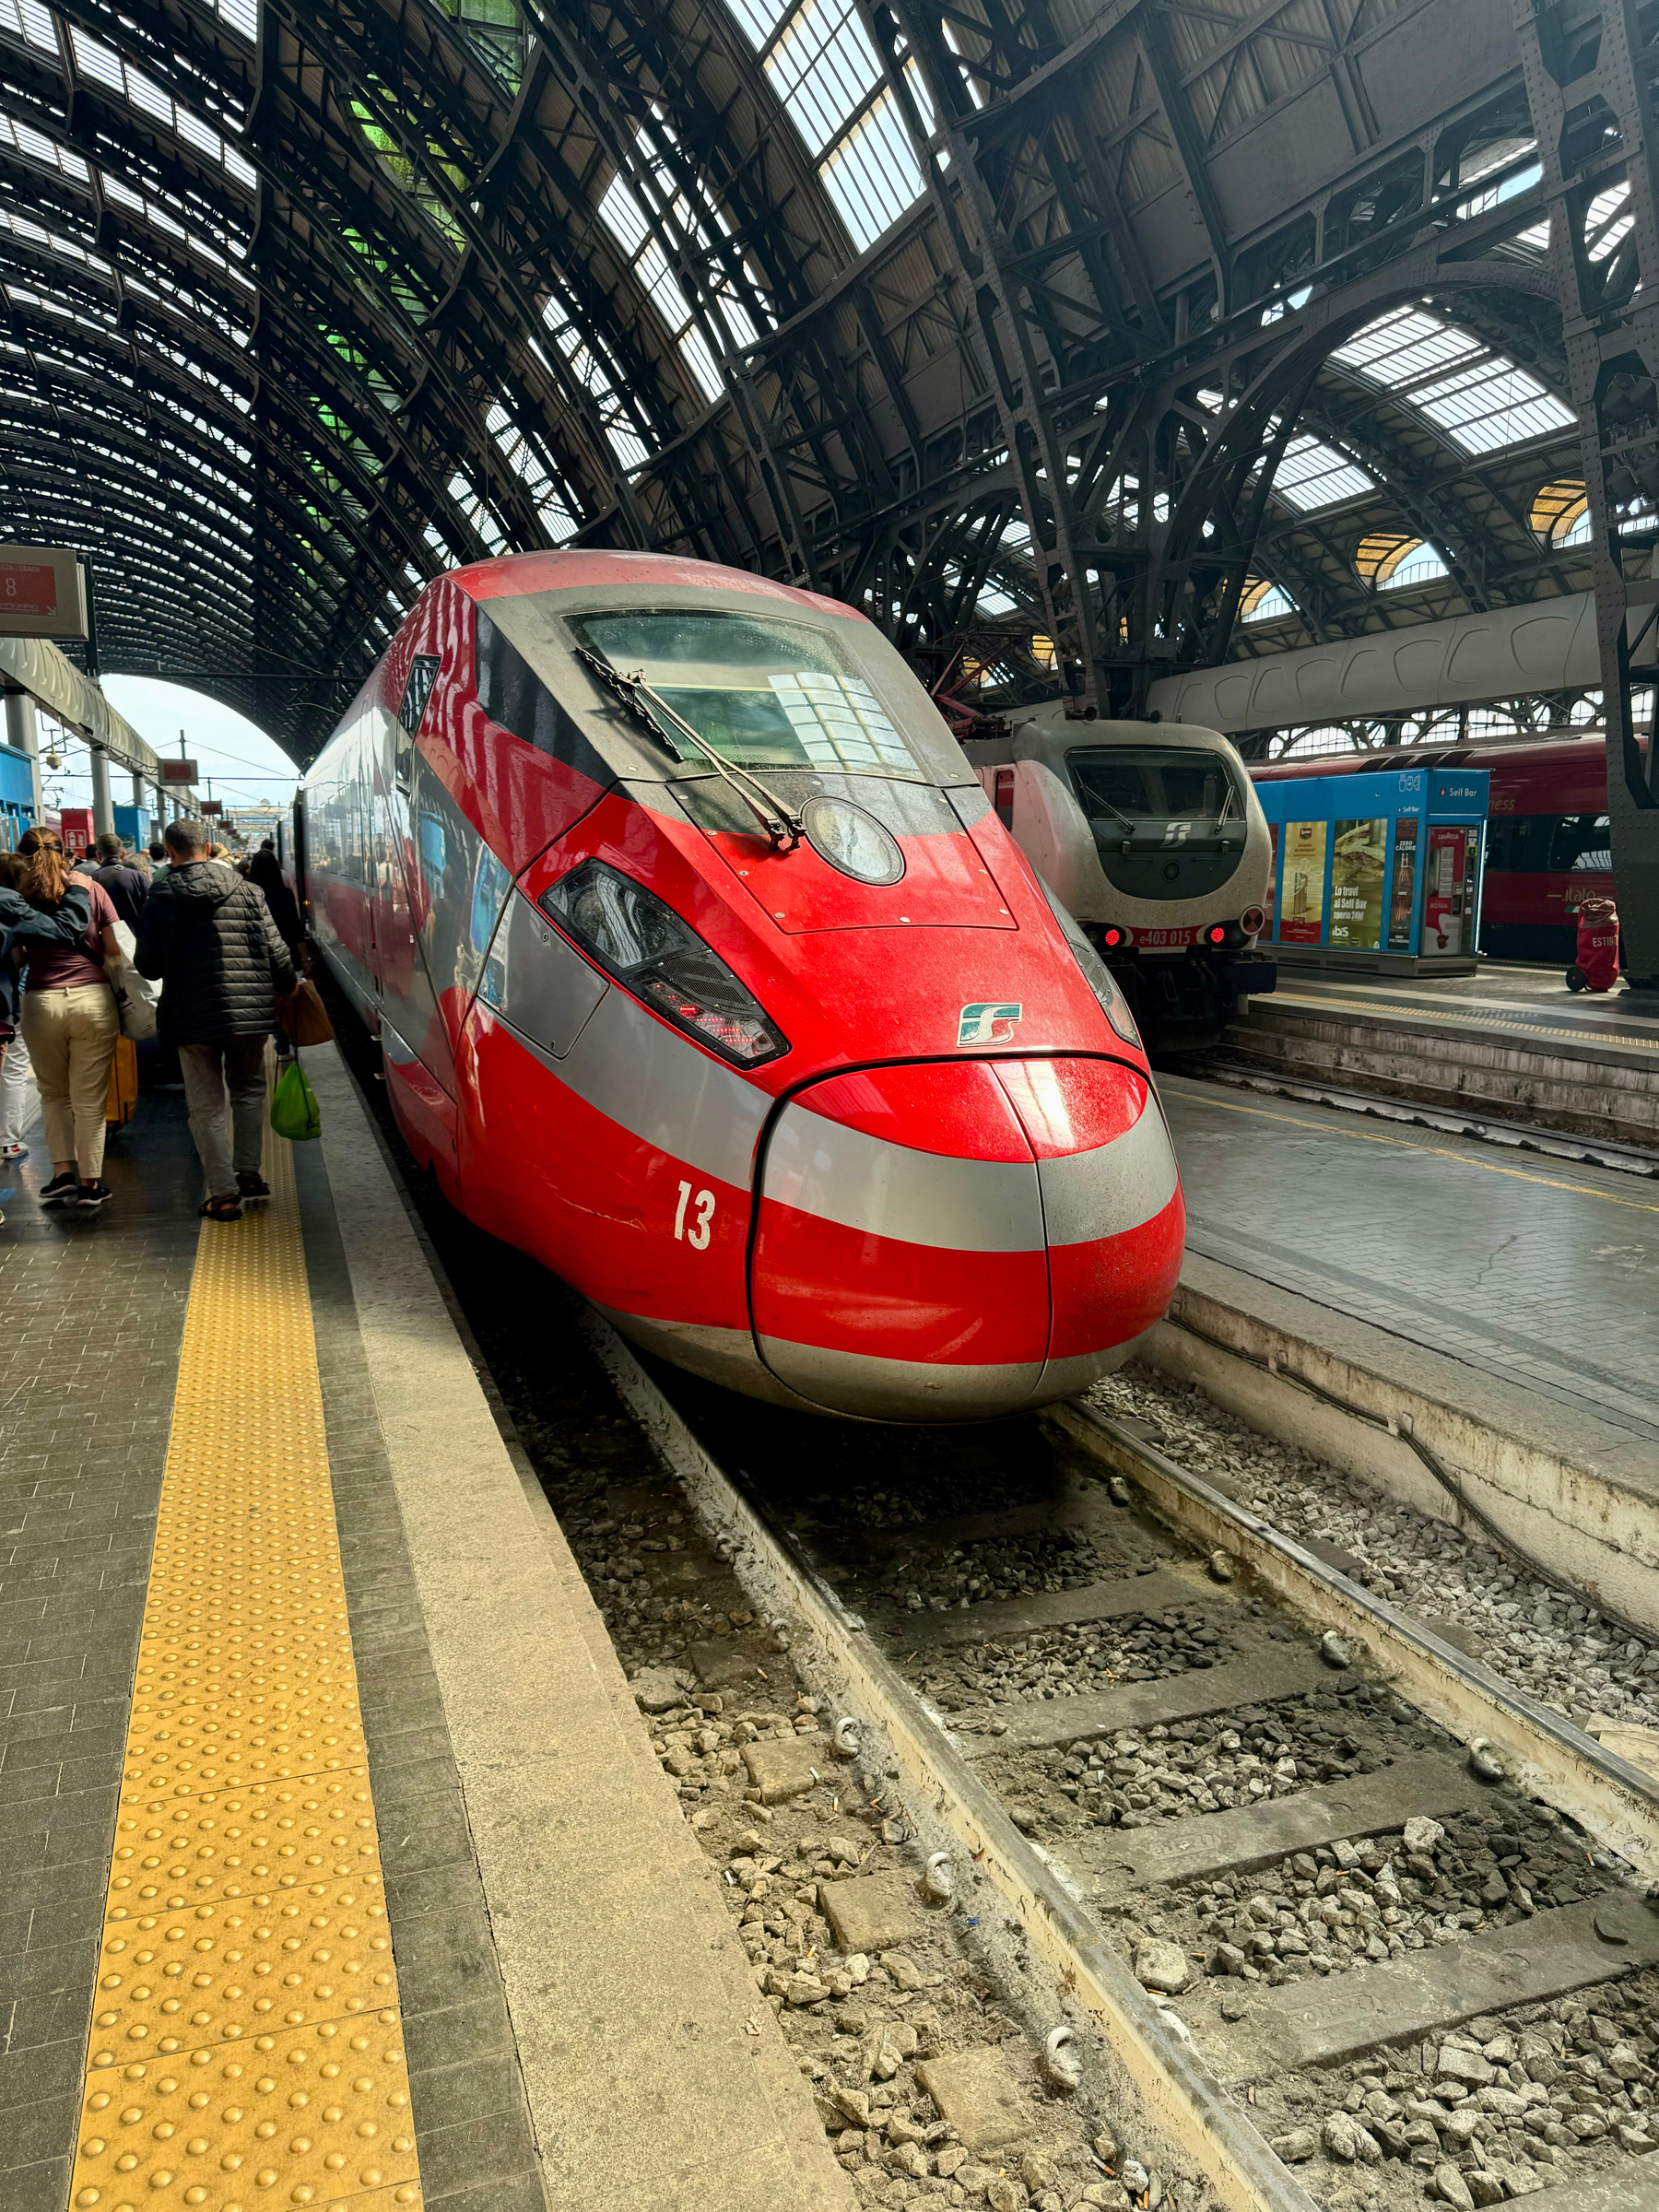 A modern red high-speed train is stationed on a platform in a large, arched train station with a glass and metal roof. Passengers are standing on the platform near the train. A second train is visible on a neighboring track.